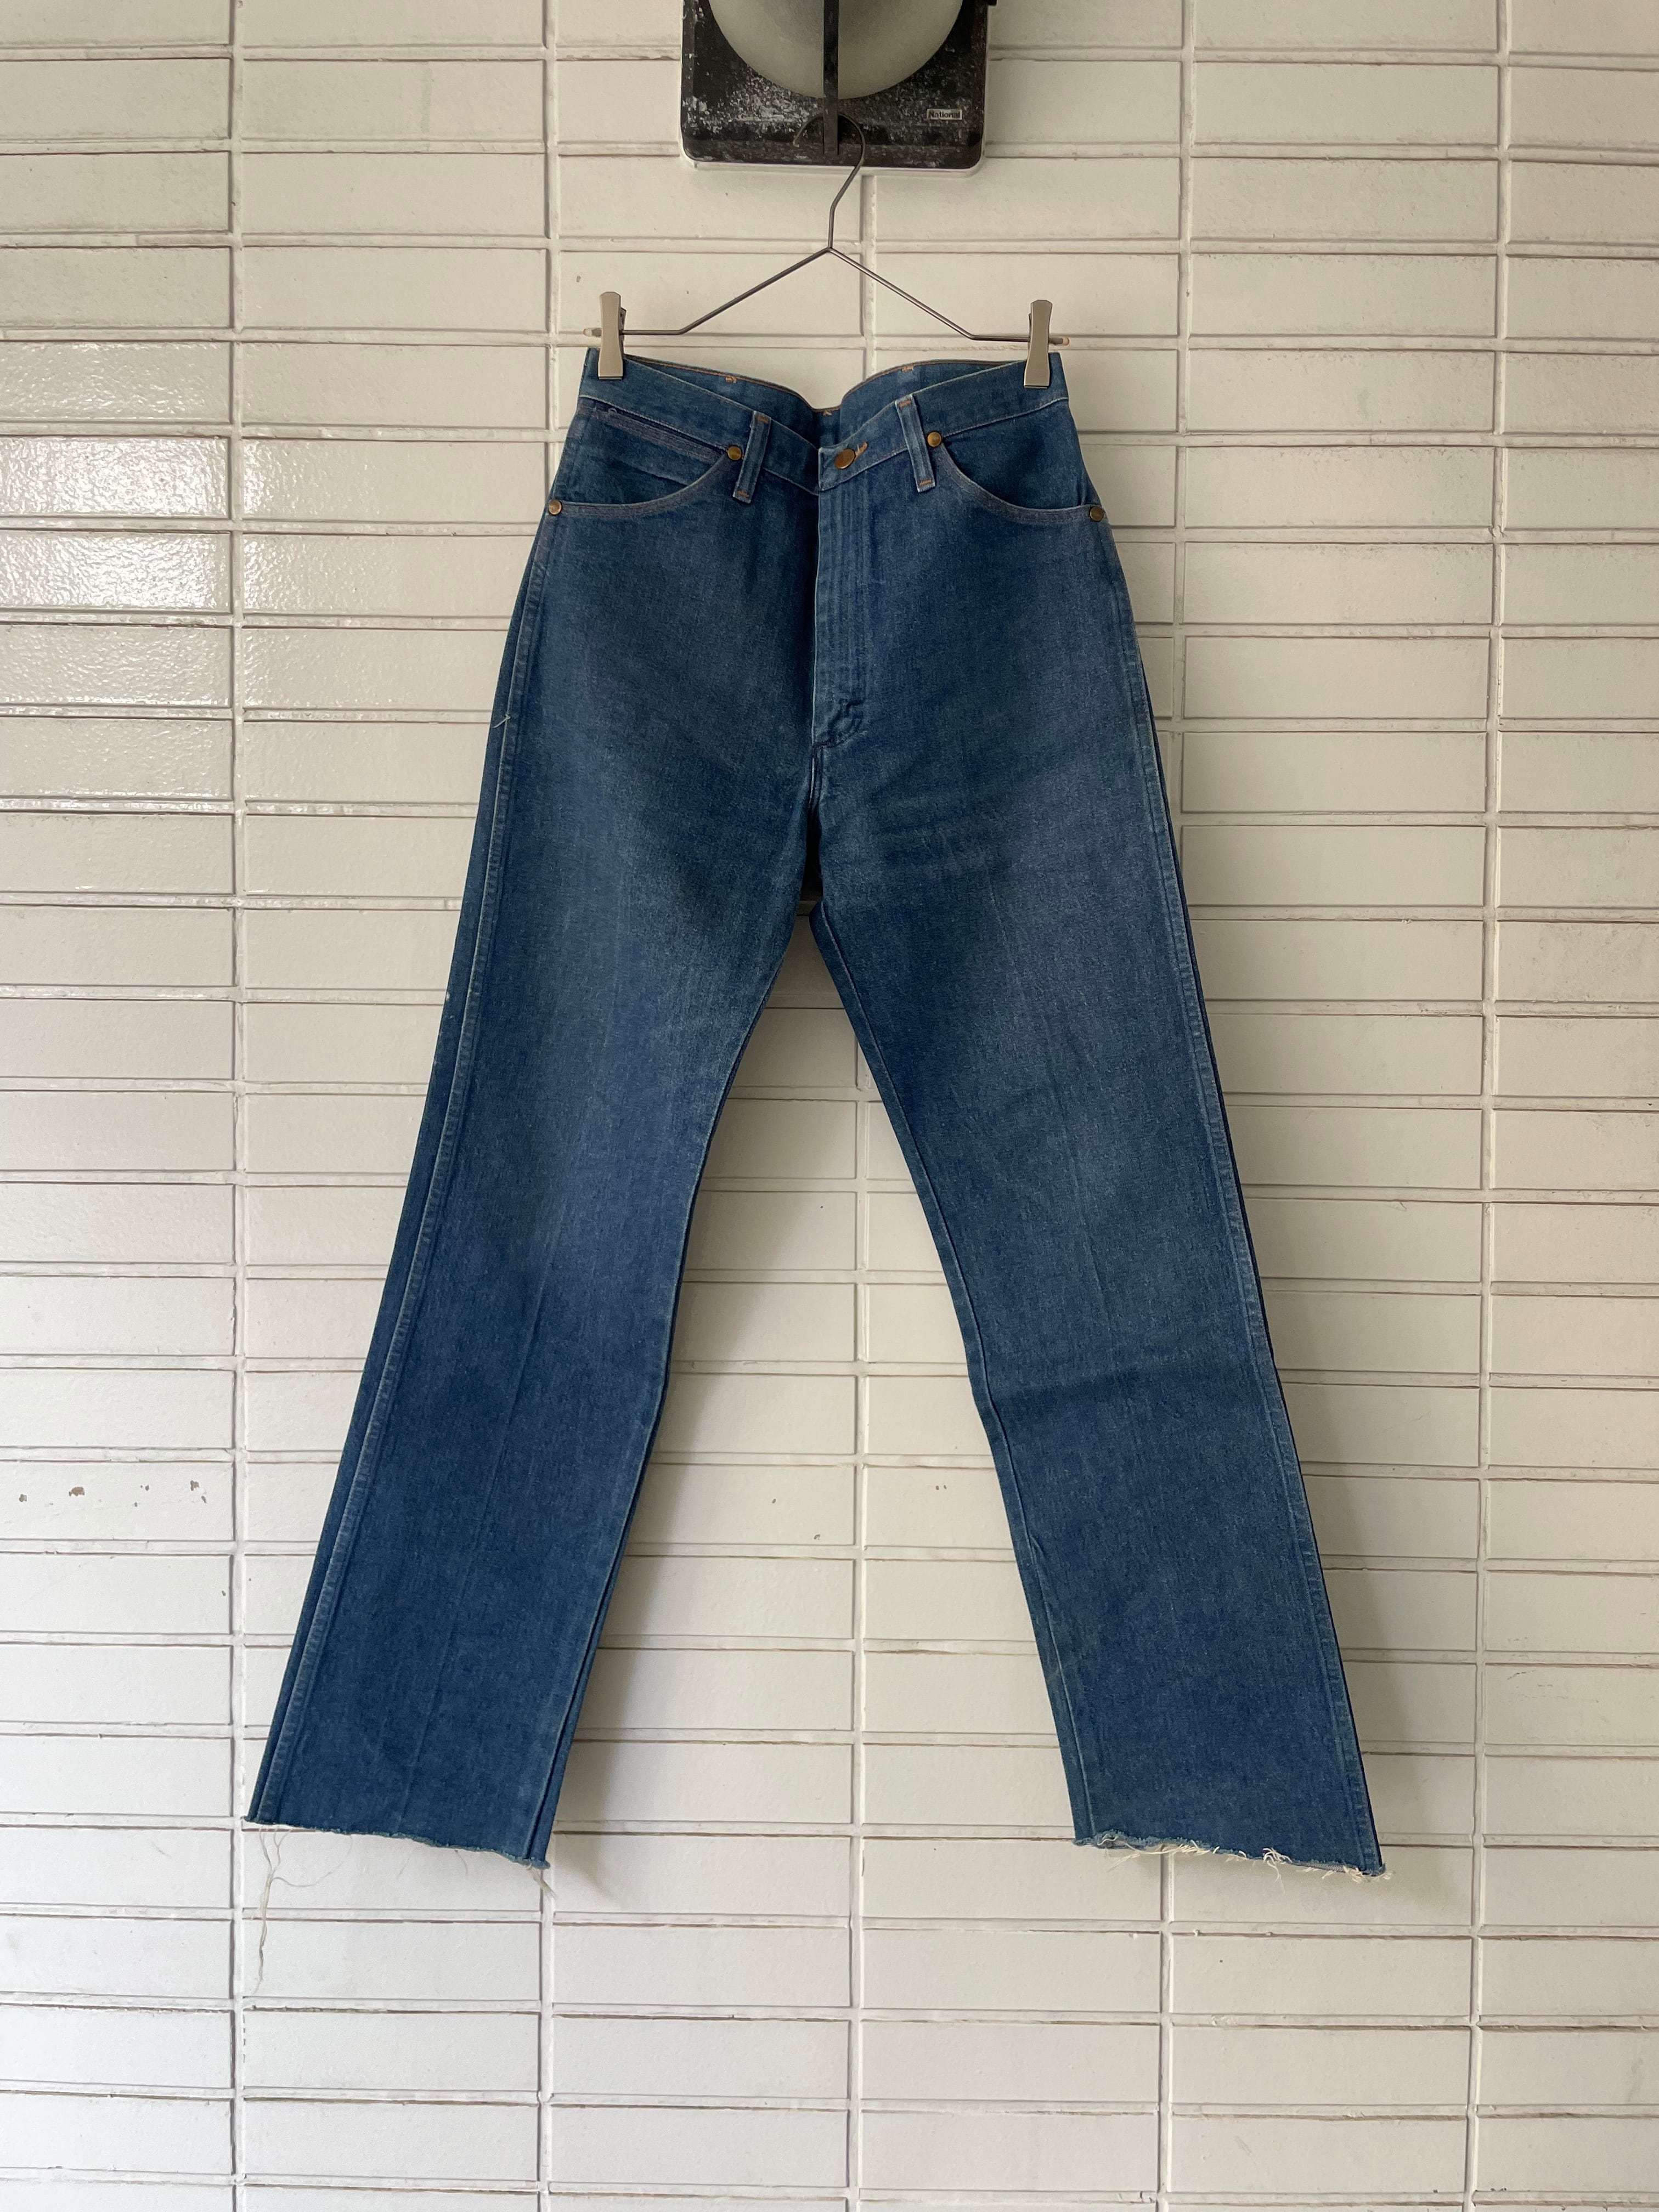 （PT074）80's Wrangler 13 MWZ made in USA cut off